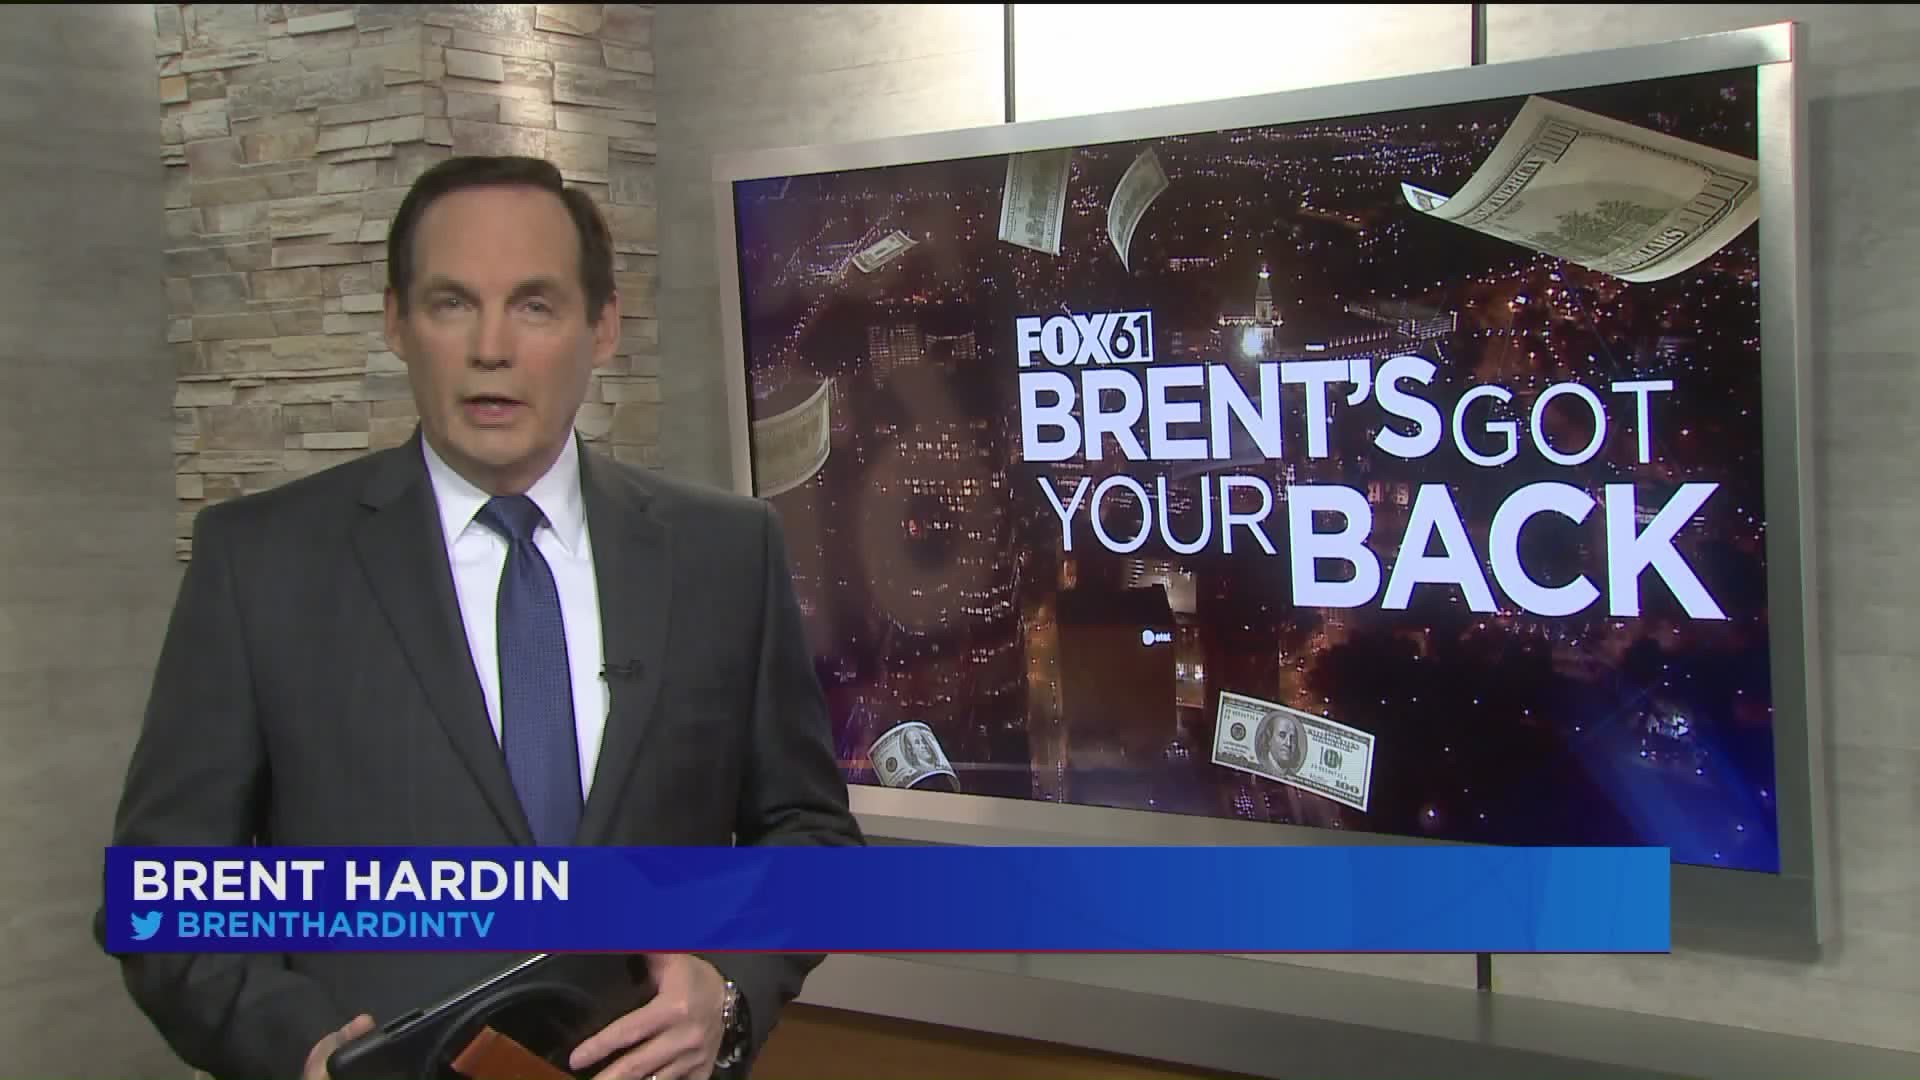 Today, Brent's got your back with IPhones.